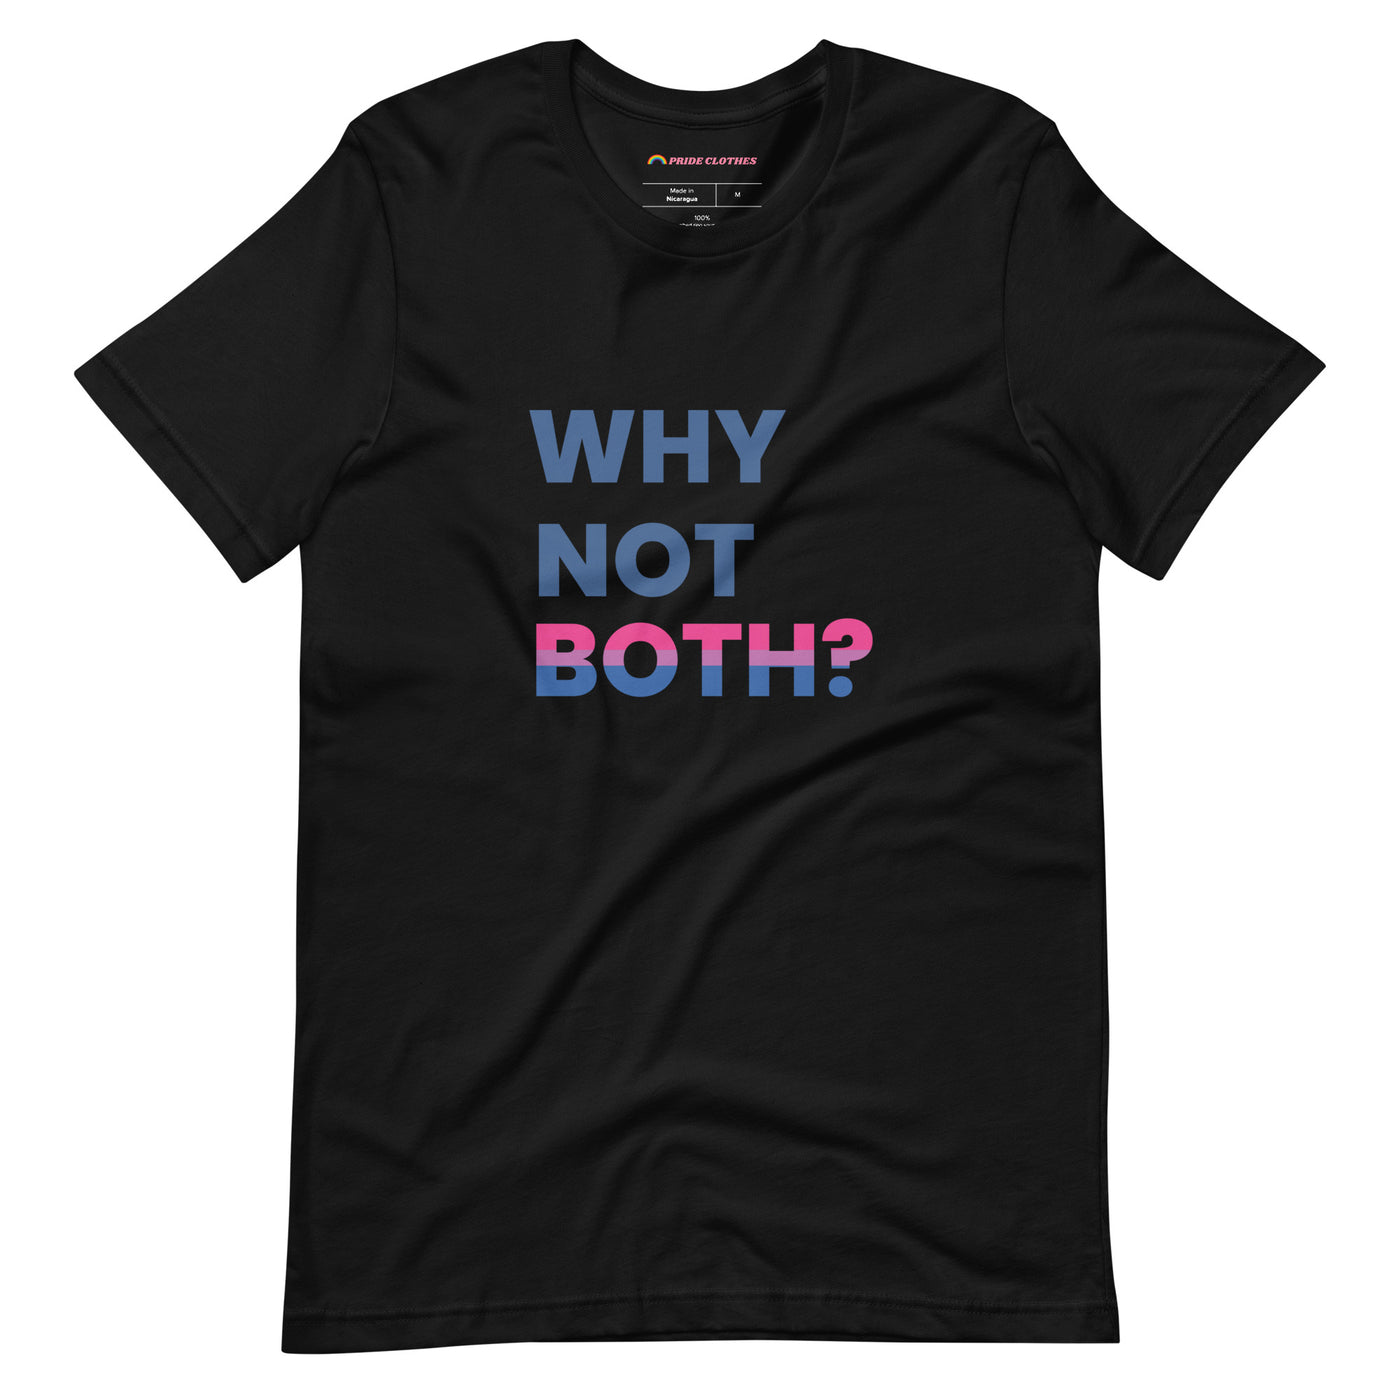 Pride Clothes - Why Limit Yourself to One Why Not Both BI Pride T-Shirt - Black